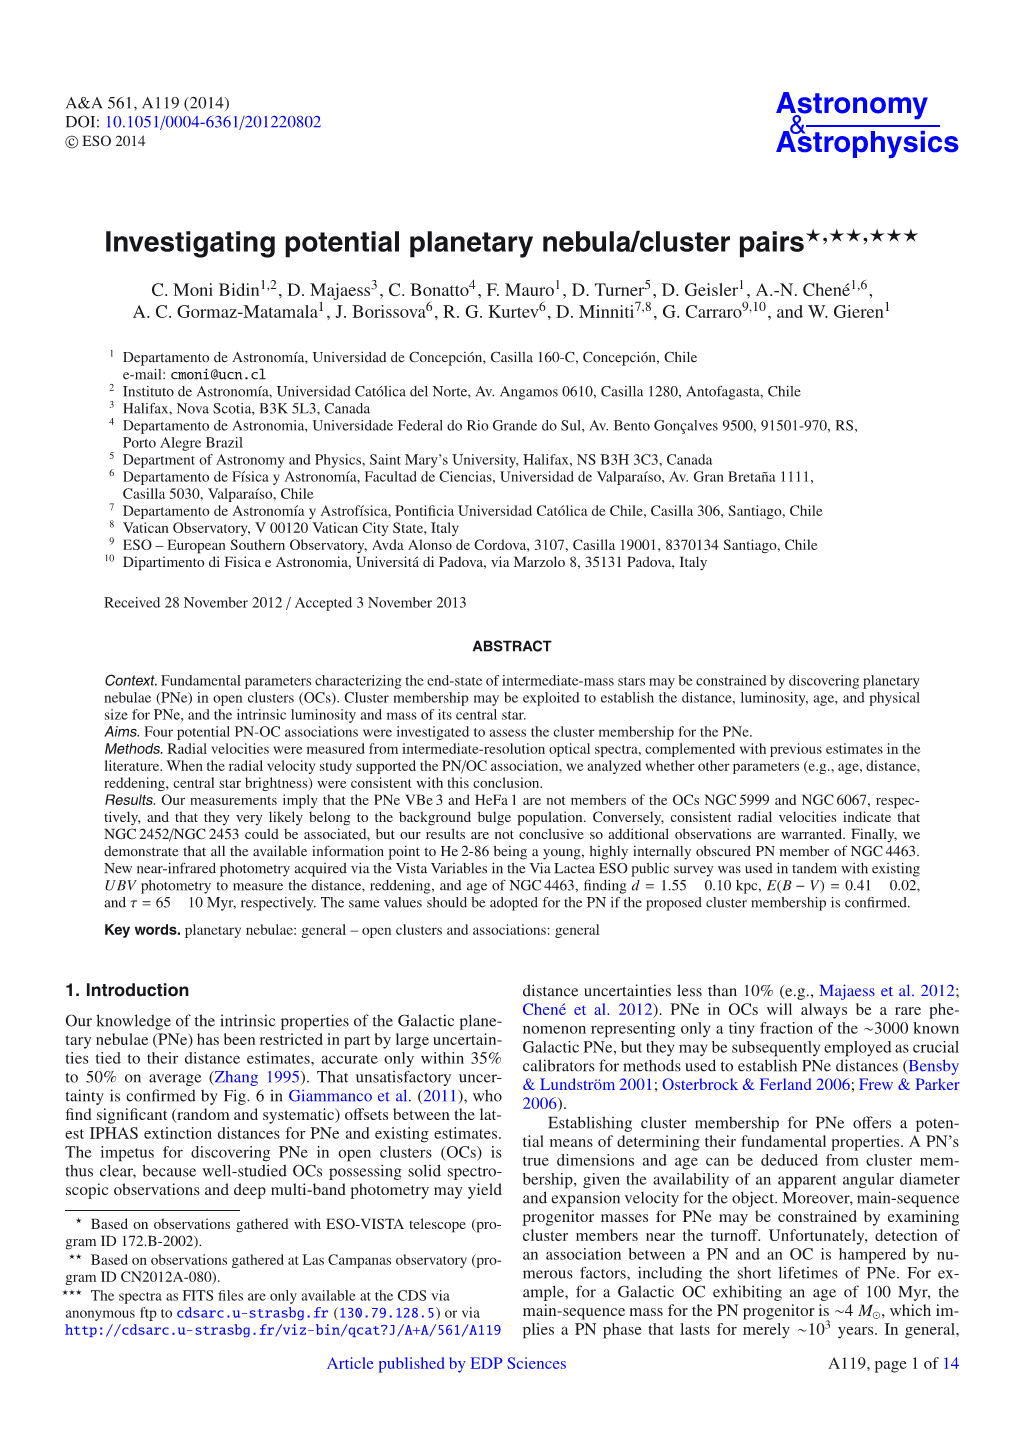 Investigating Potential Planetary Nebula/Cluster Pairs⋆⋆⋆⋆⋆⋆